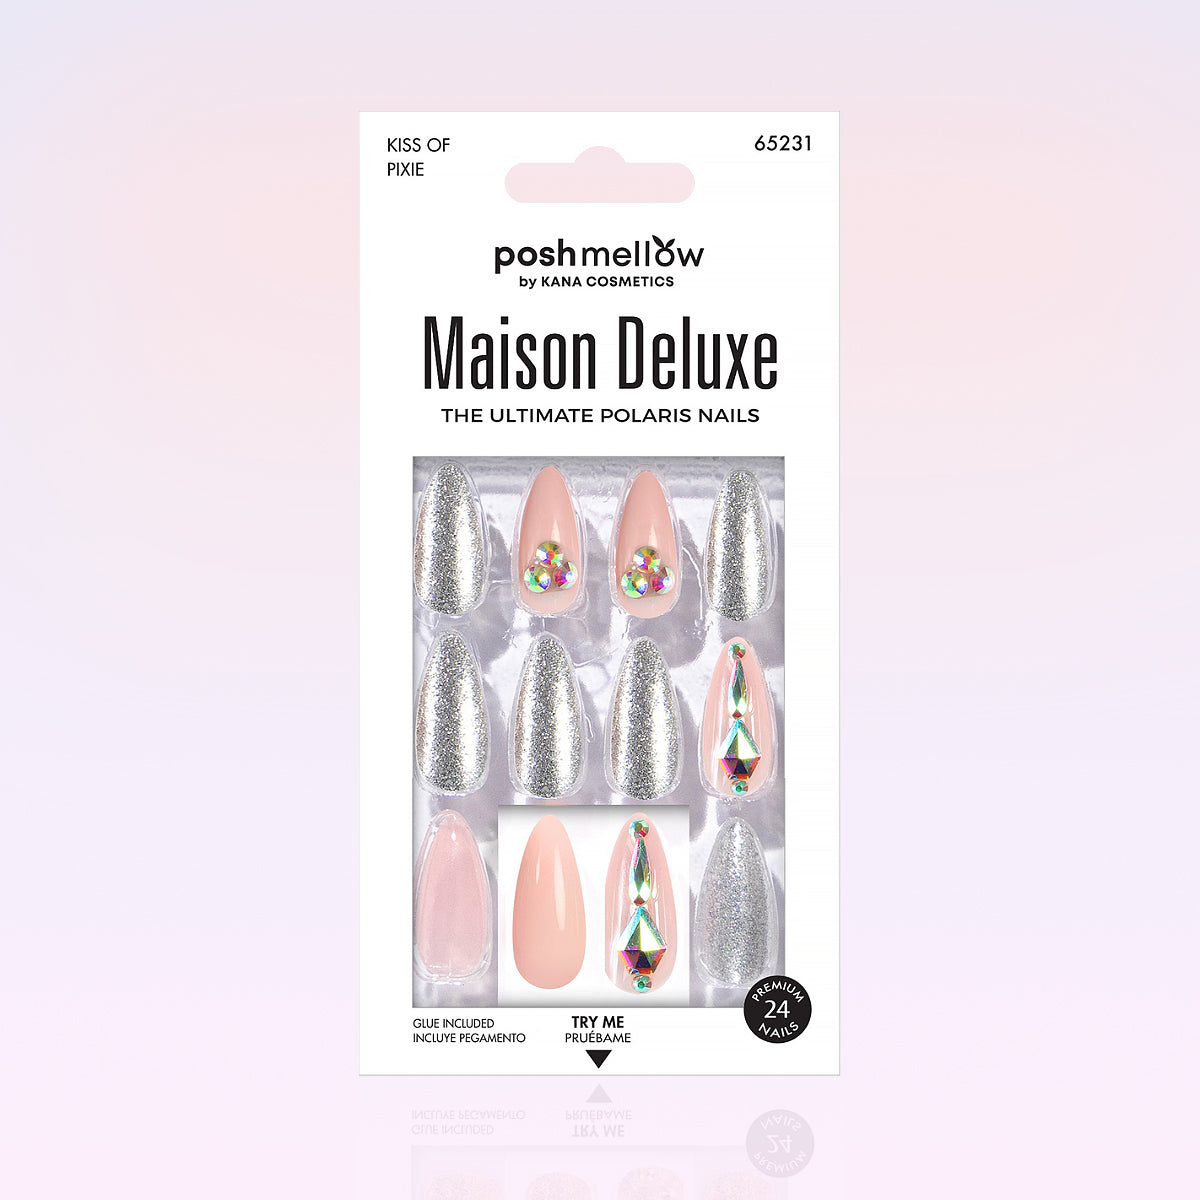 Maison Deluxe - Kiss of Pixie